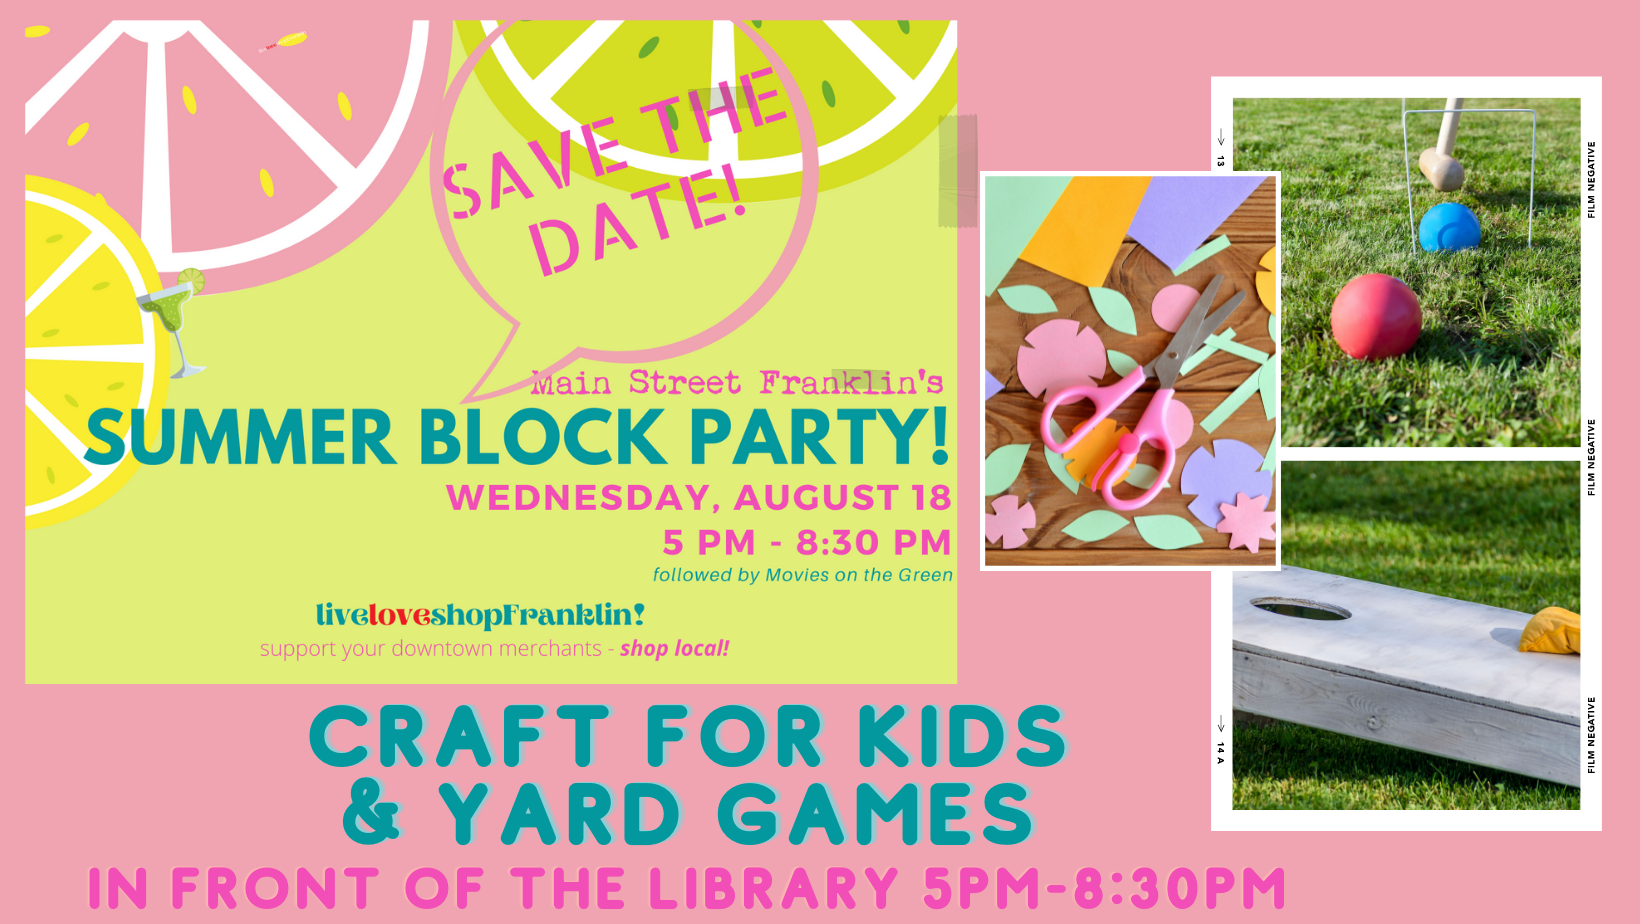 Craft & Yard Games on Summer Block Party 8.18.21.png